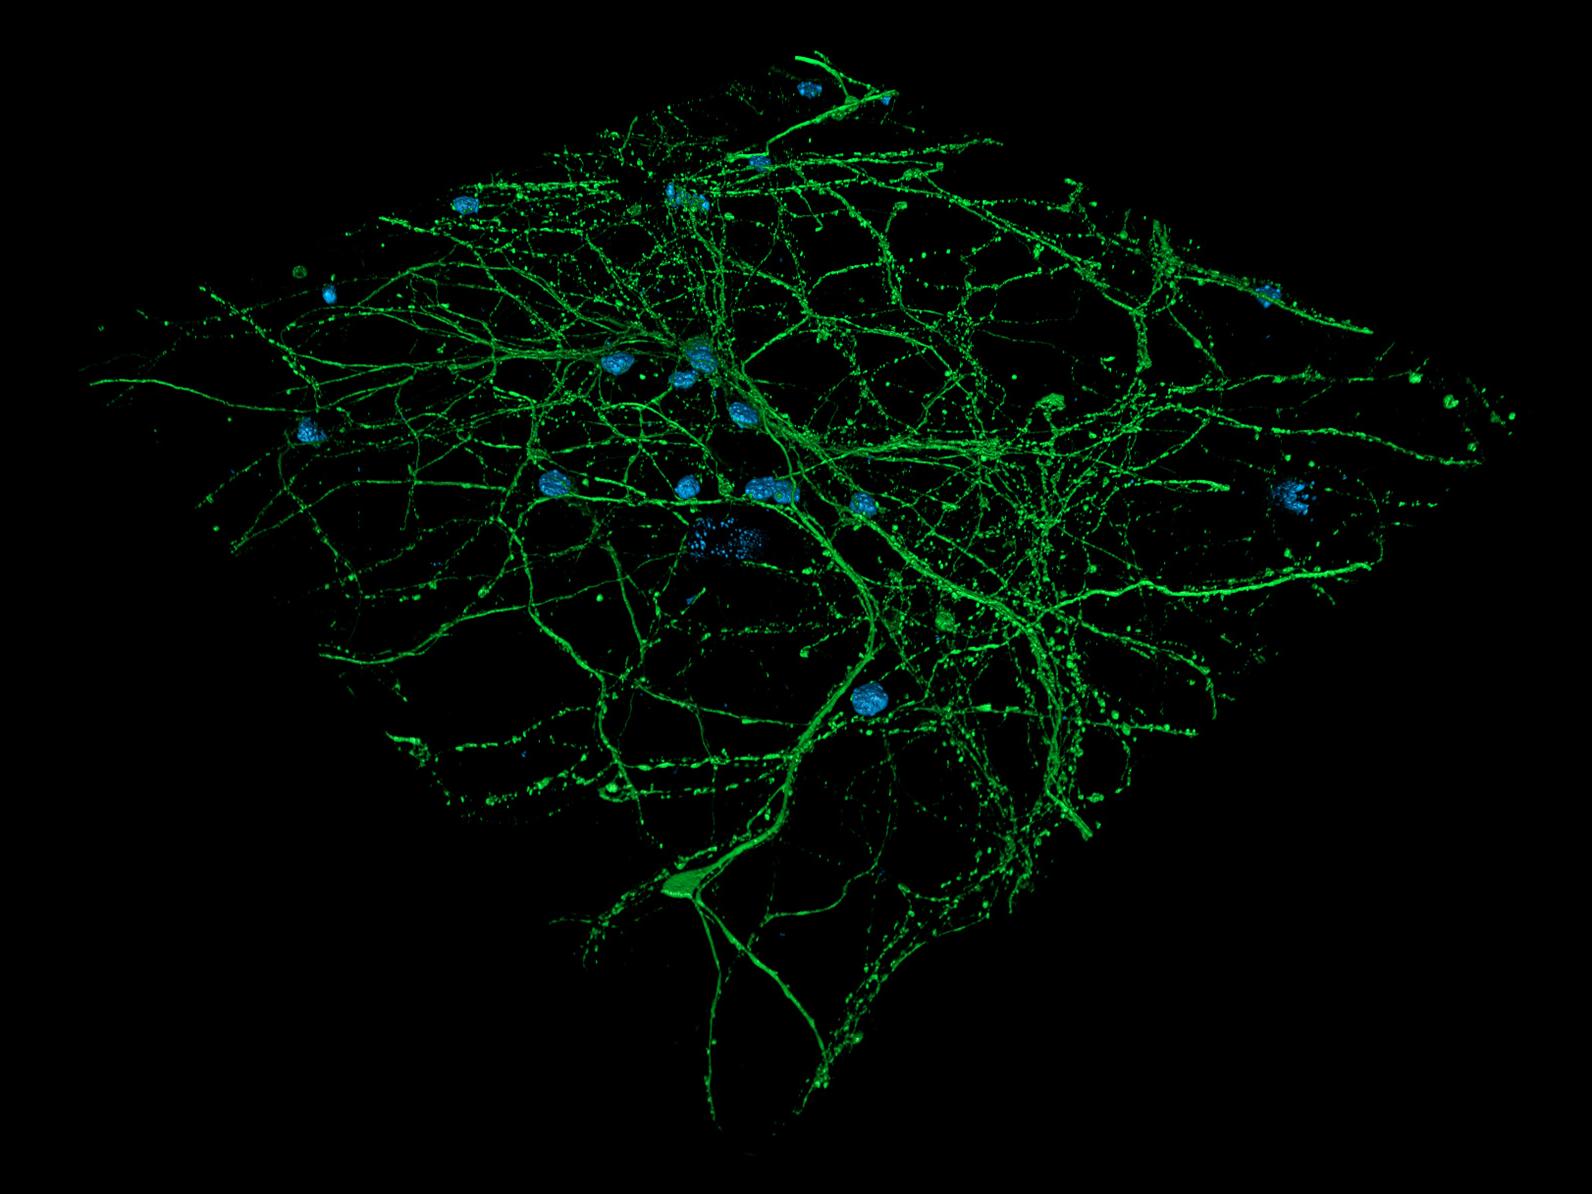 Comparison of a widefield image and 3D rendering of cortical neurons stained for DNA and microtubules. Courtesy of L. Behrendt, Leibniz-Institute on Aging – Fritz-Lipmann-Institut e.V. (FLI), Germany.